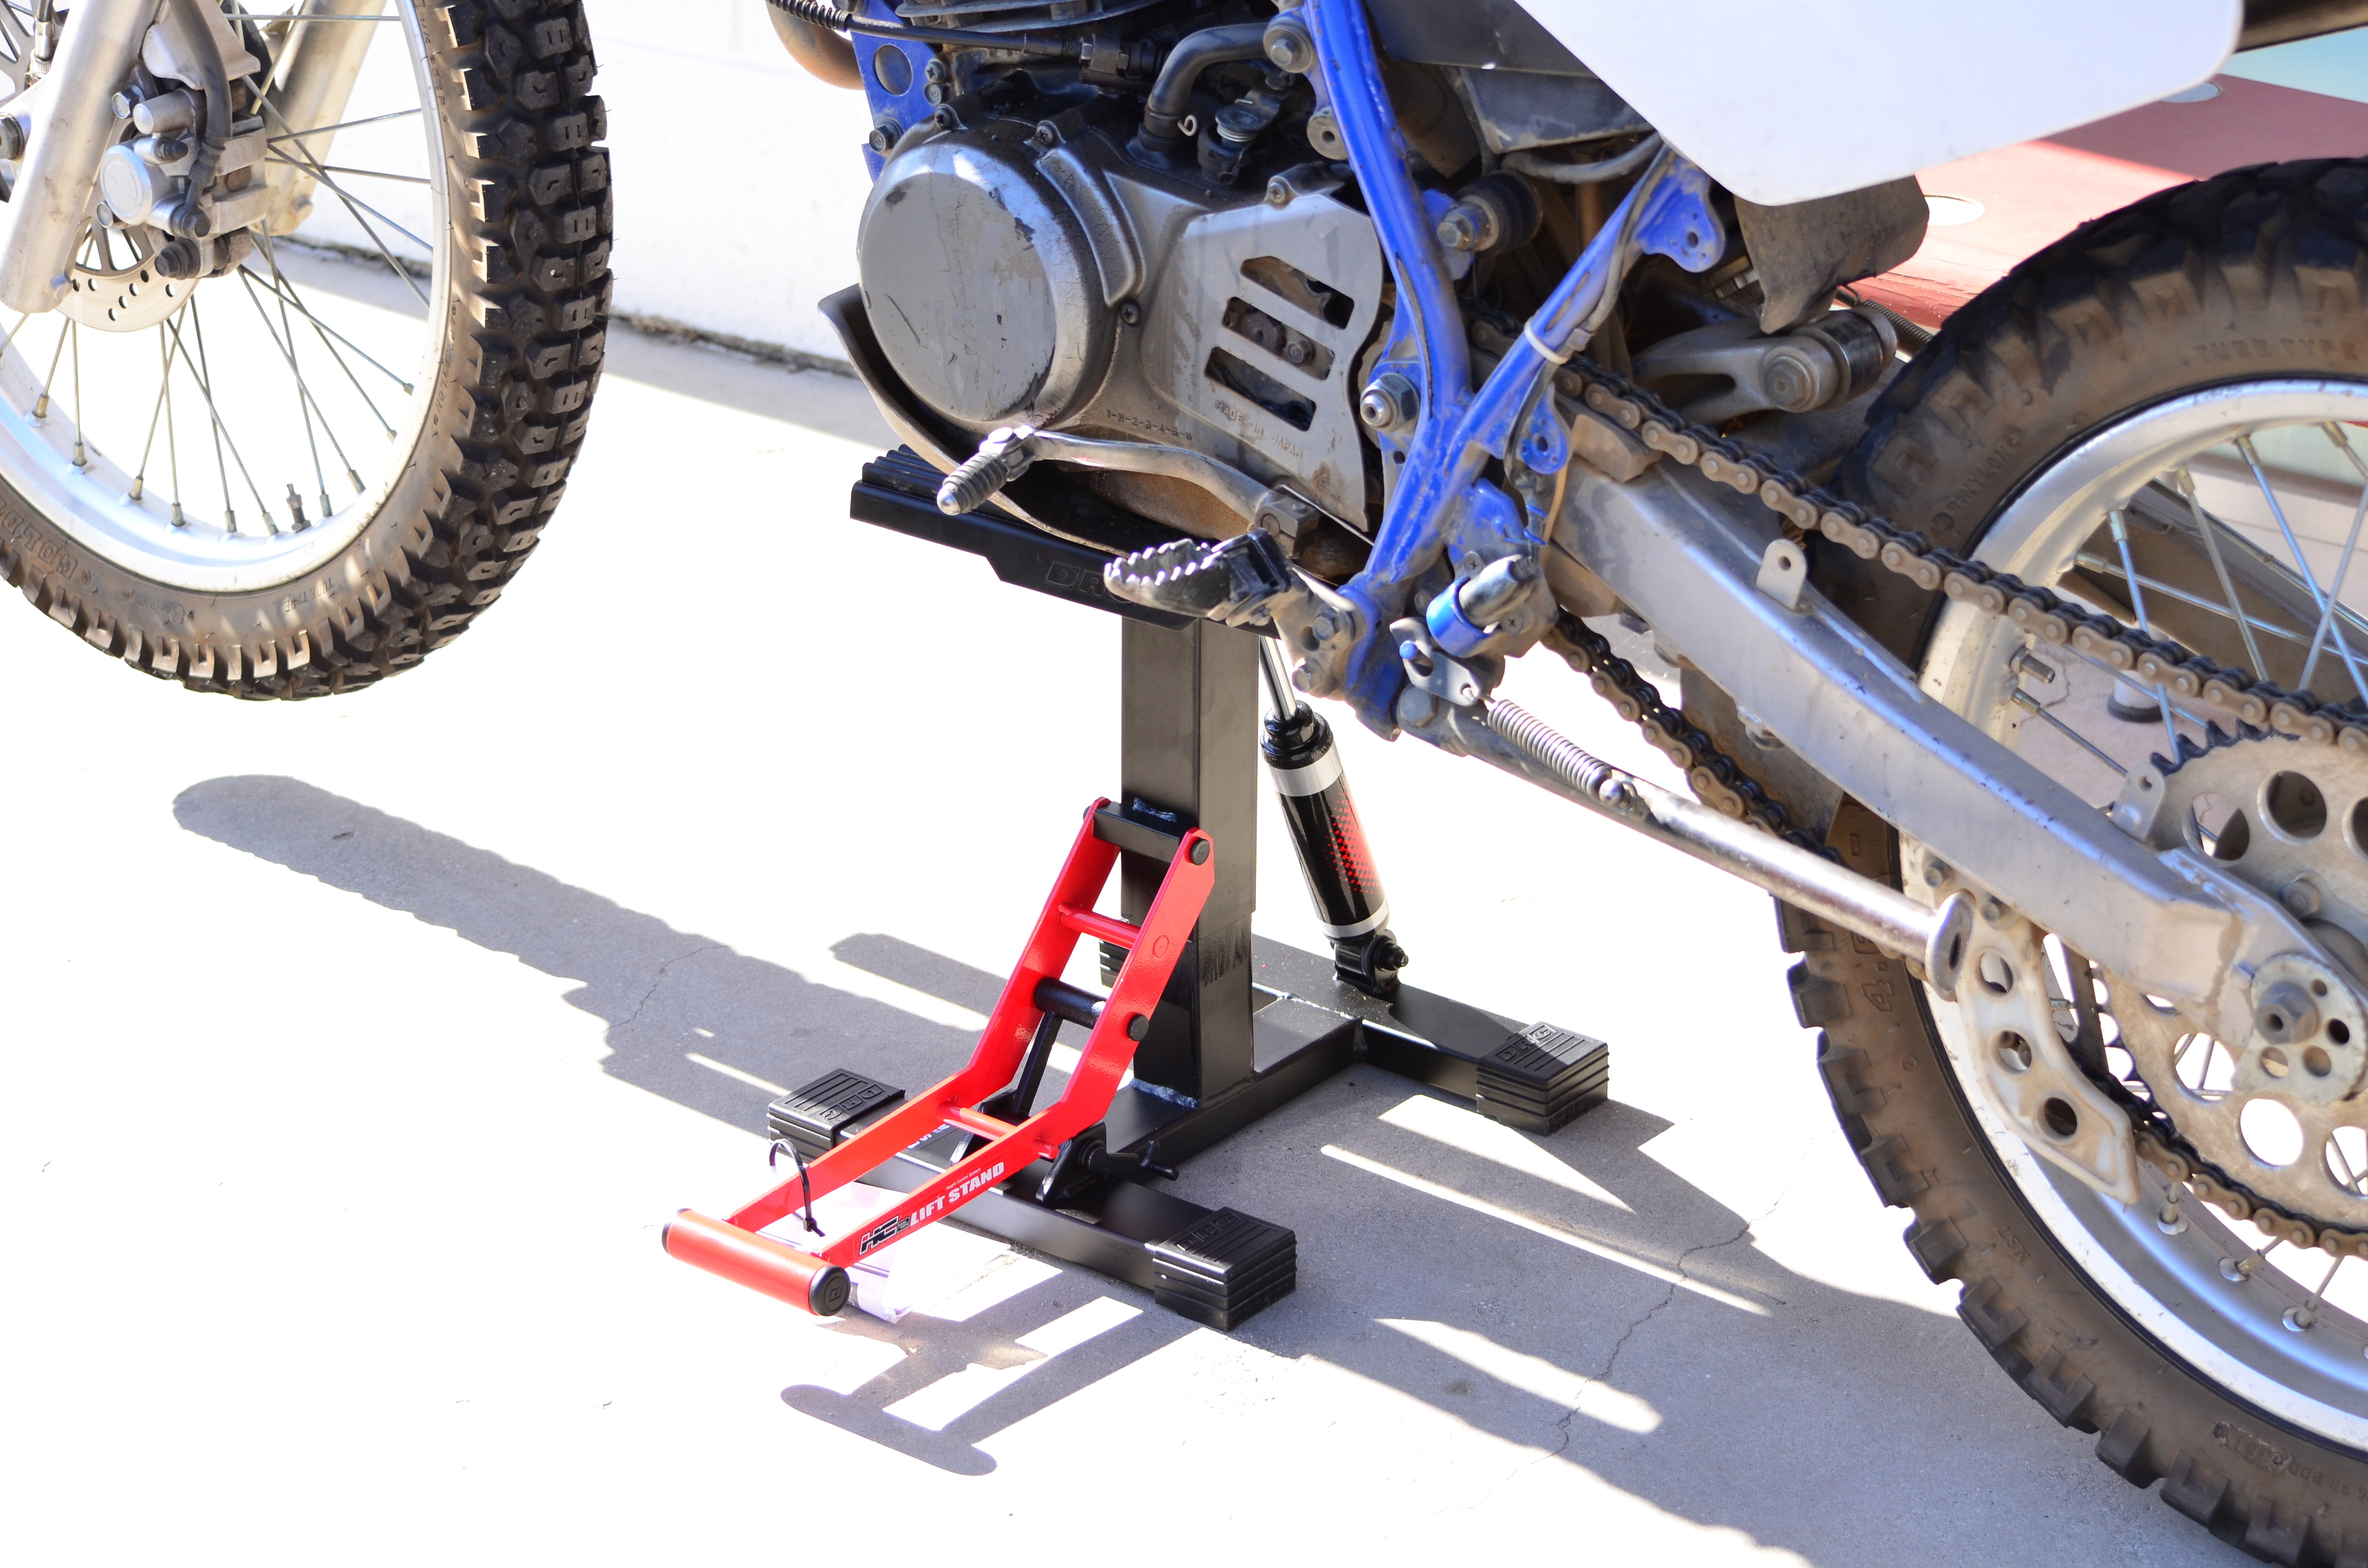 HC2 Height Control System Motorcycle Lift Stand - Black - Click Image to Close